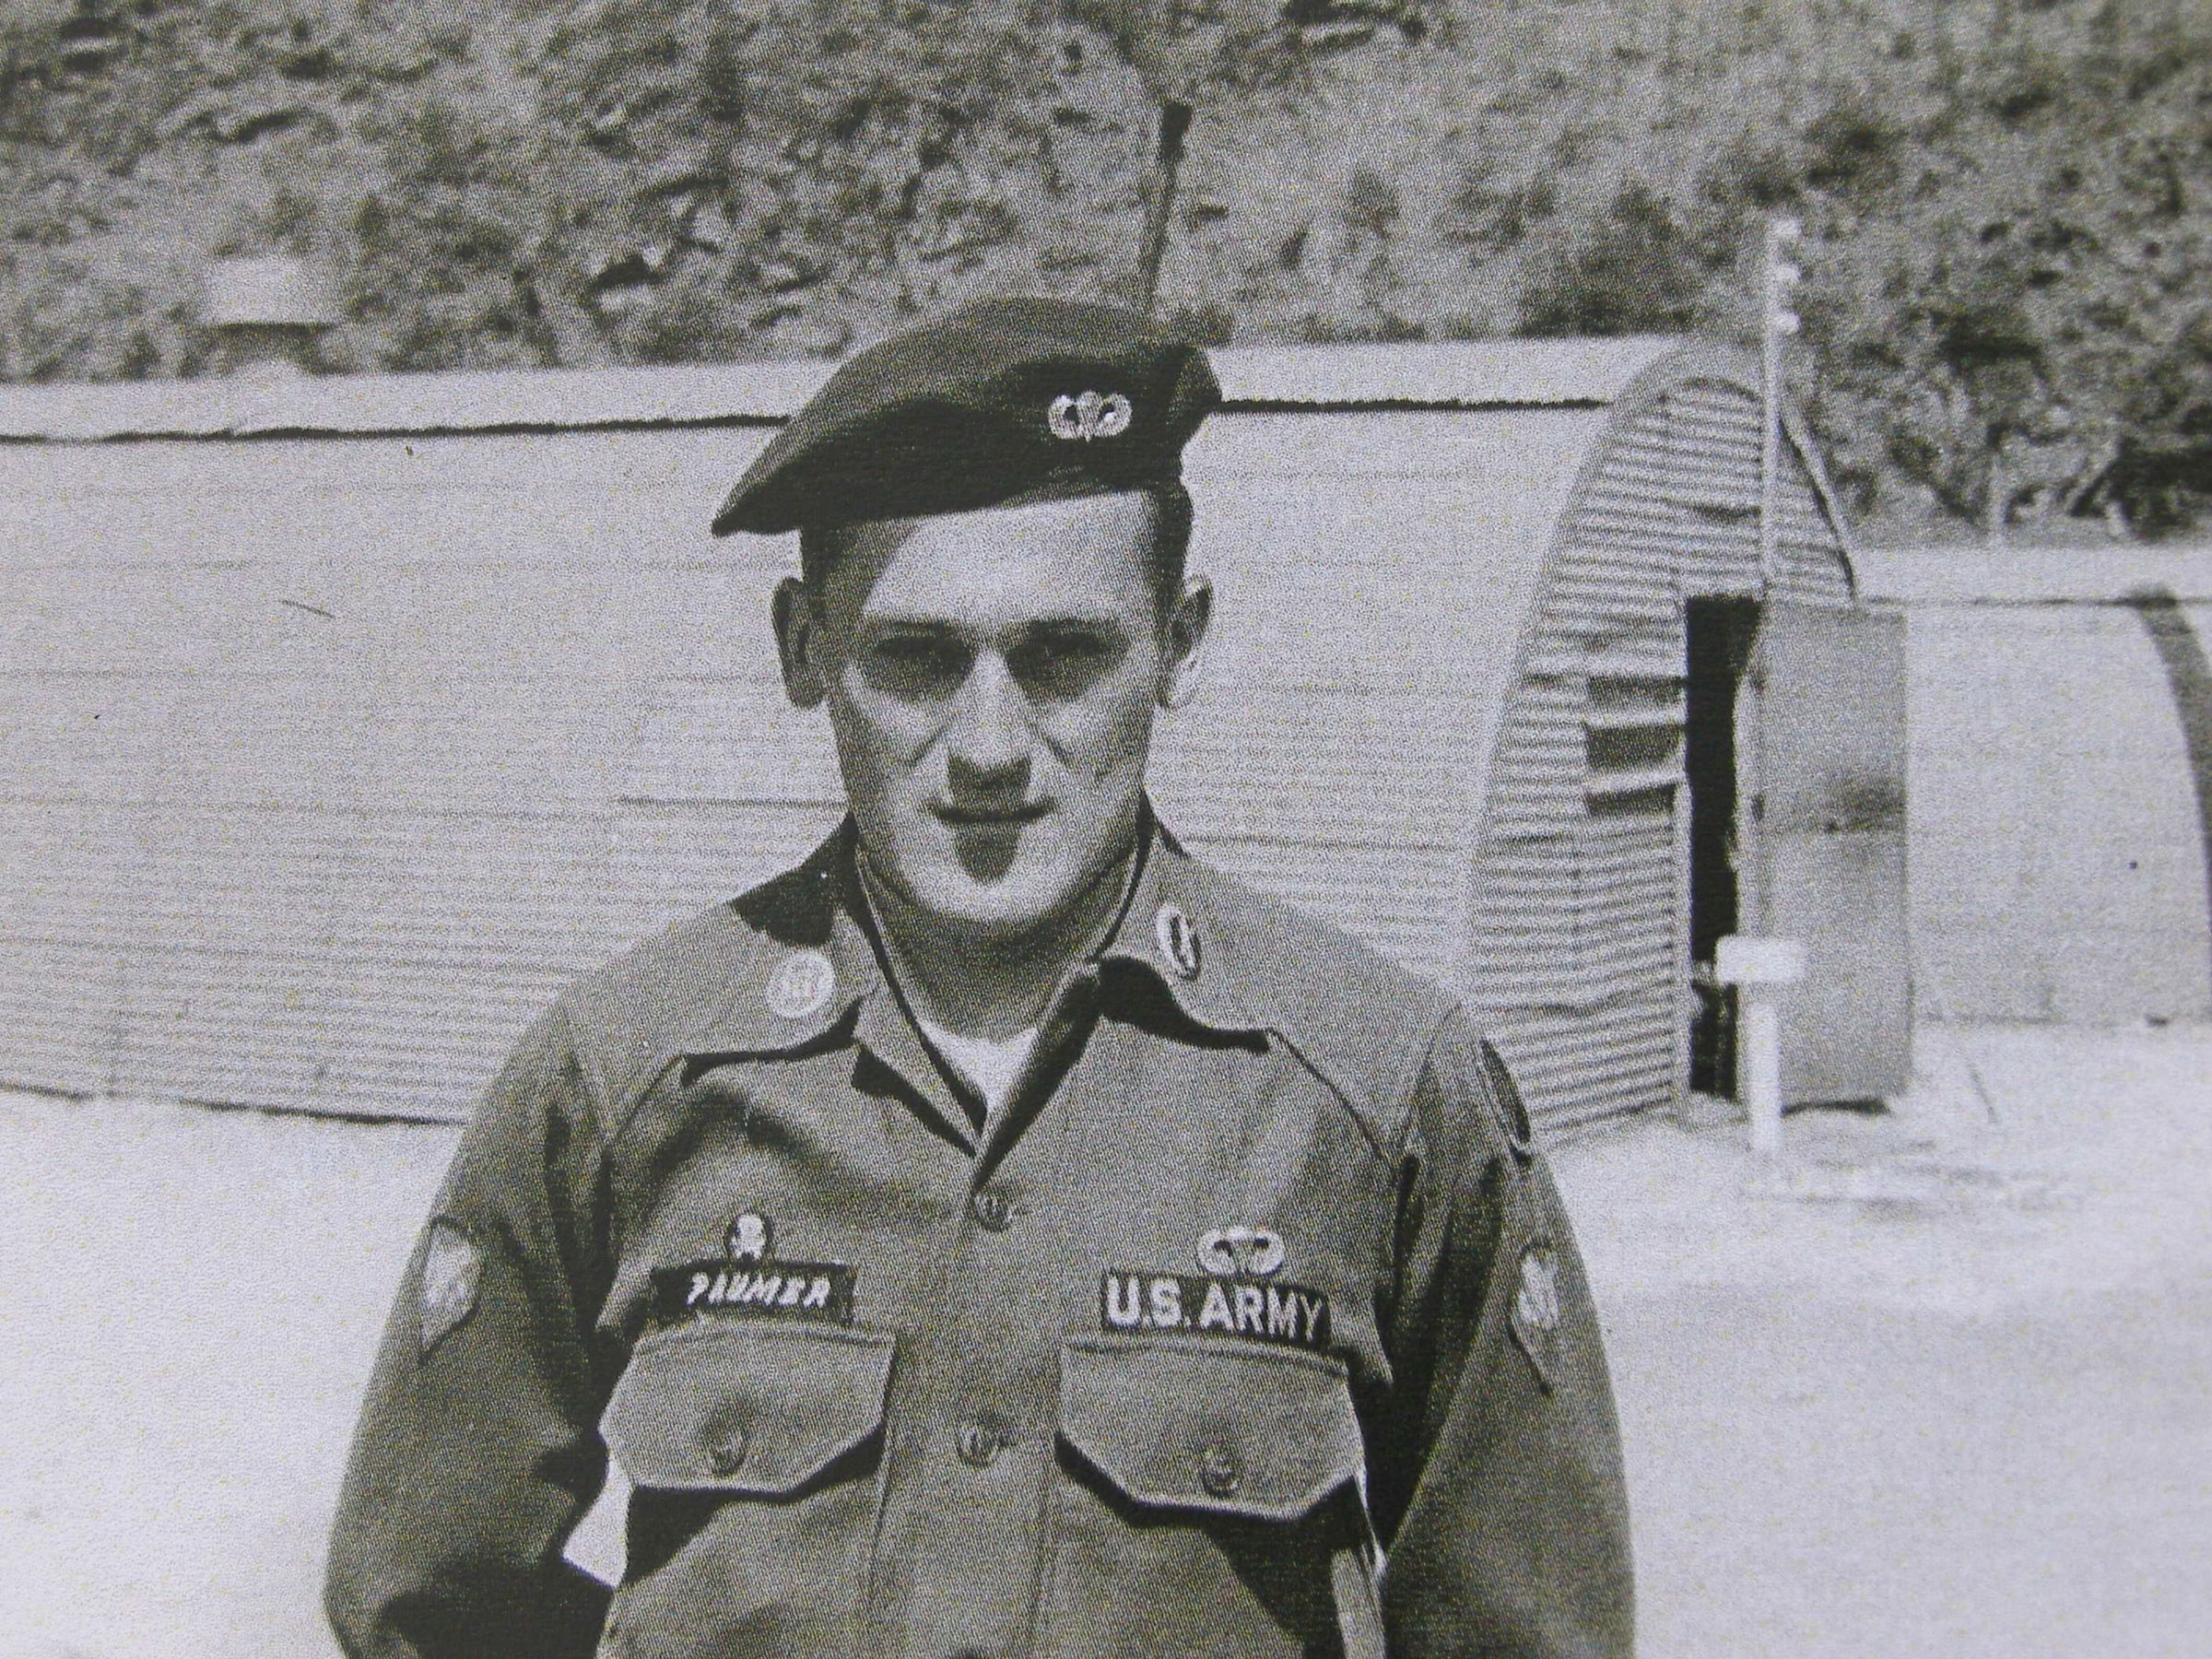 Milan Paumer as a member of US Army